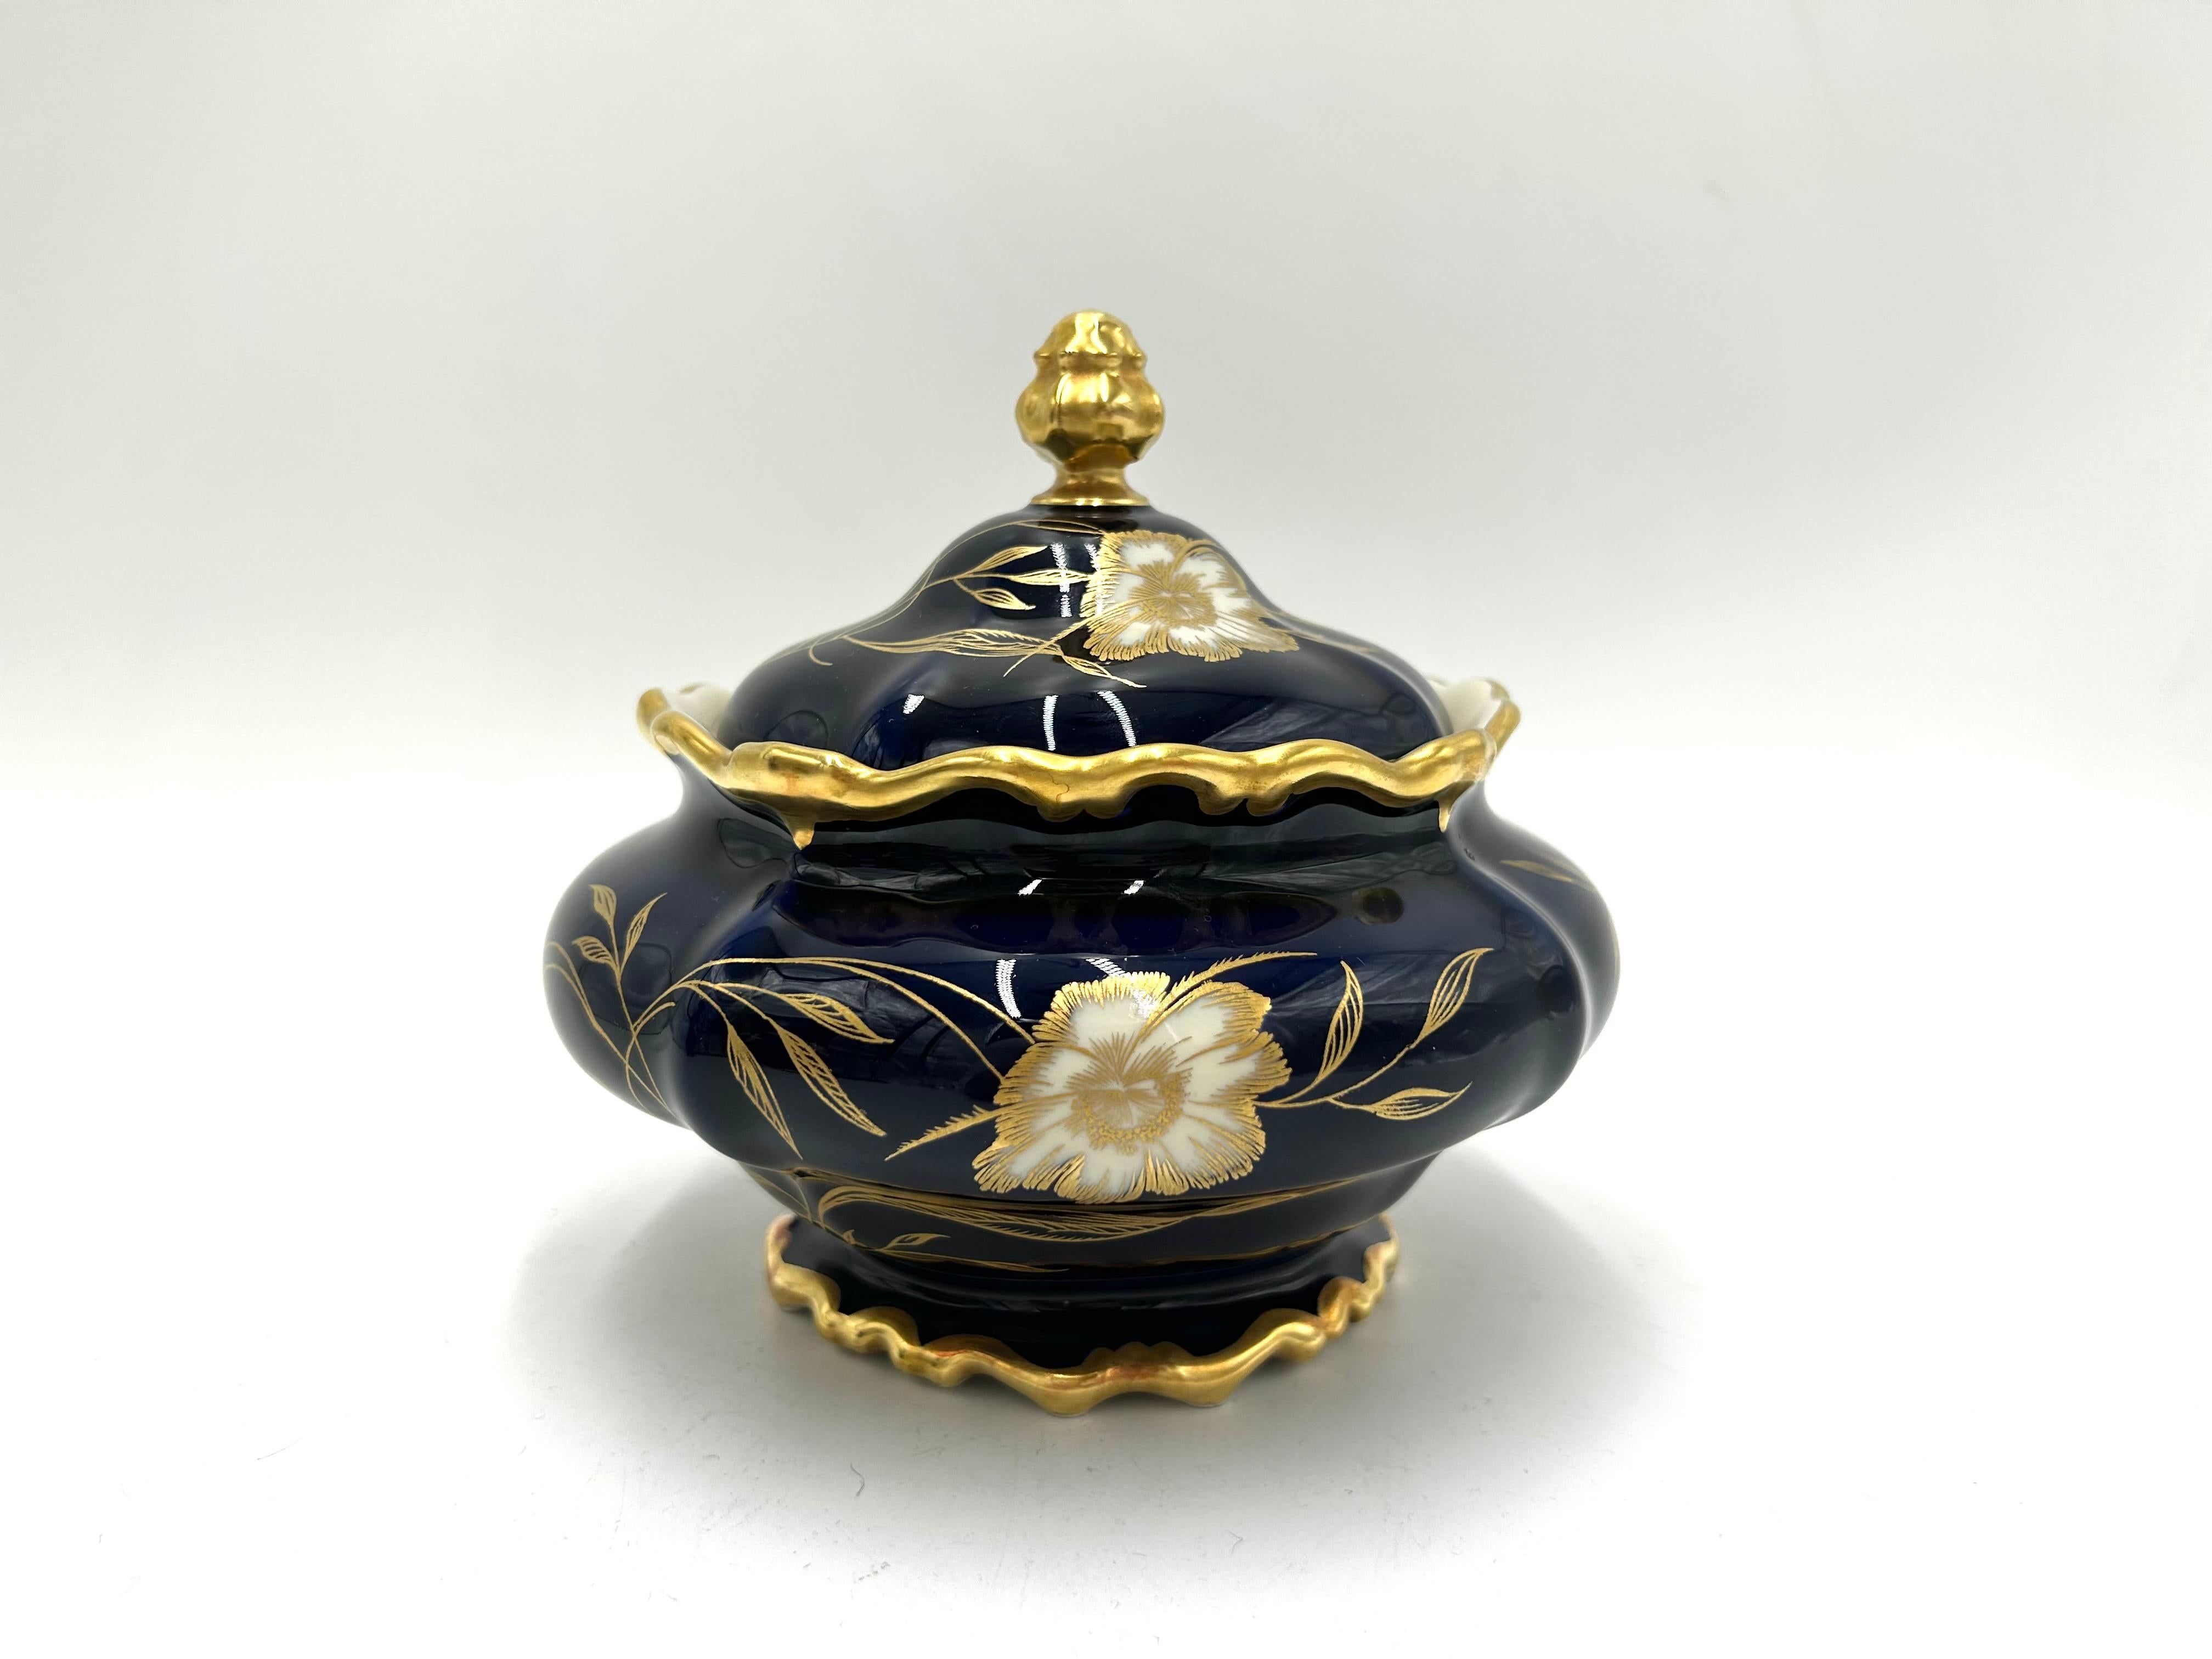 Porcelain casket with a lid - a box for sweets from the Pompadour collection, made in Germany by the excellent Rosenthal label. Ecru porcelain decorated in the echt cobalt technique, with a motif of golden flowers on a navy blue background. The